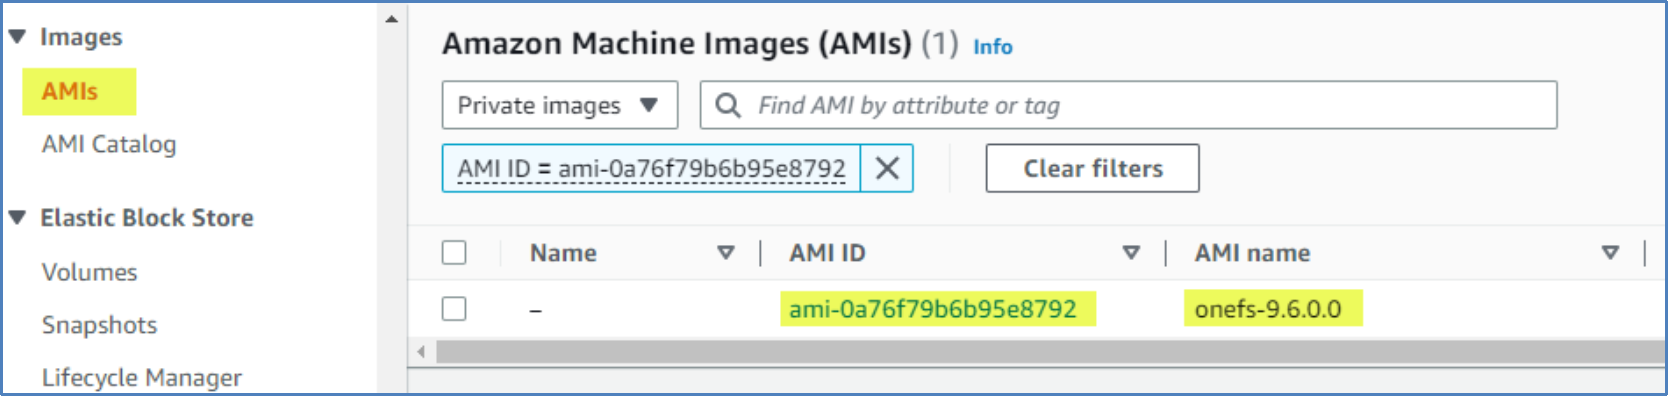 This figure shows a OneFS AMI image info for the EC2 service.